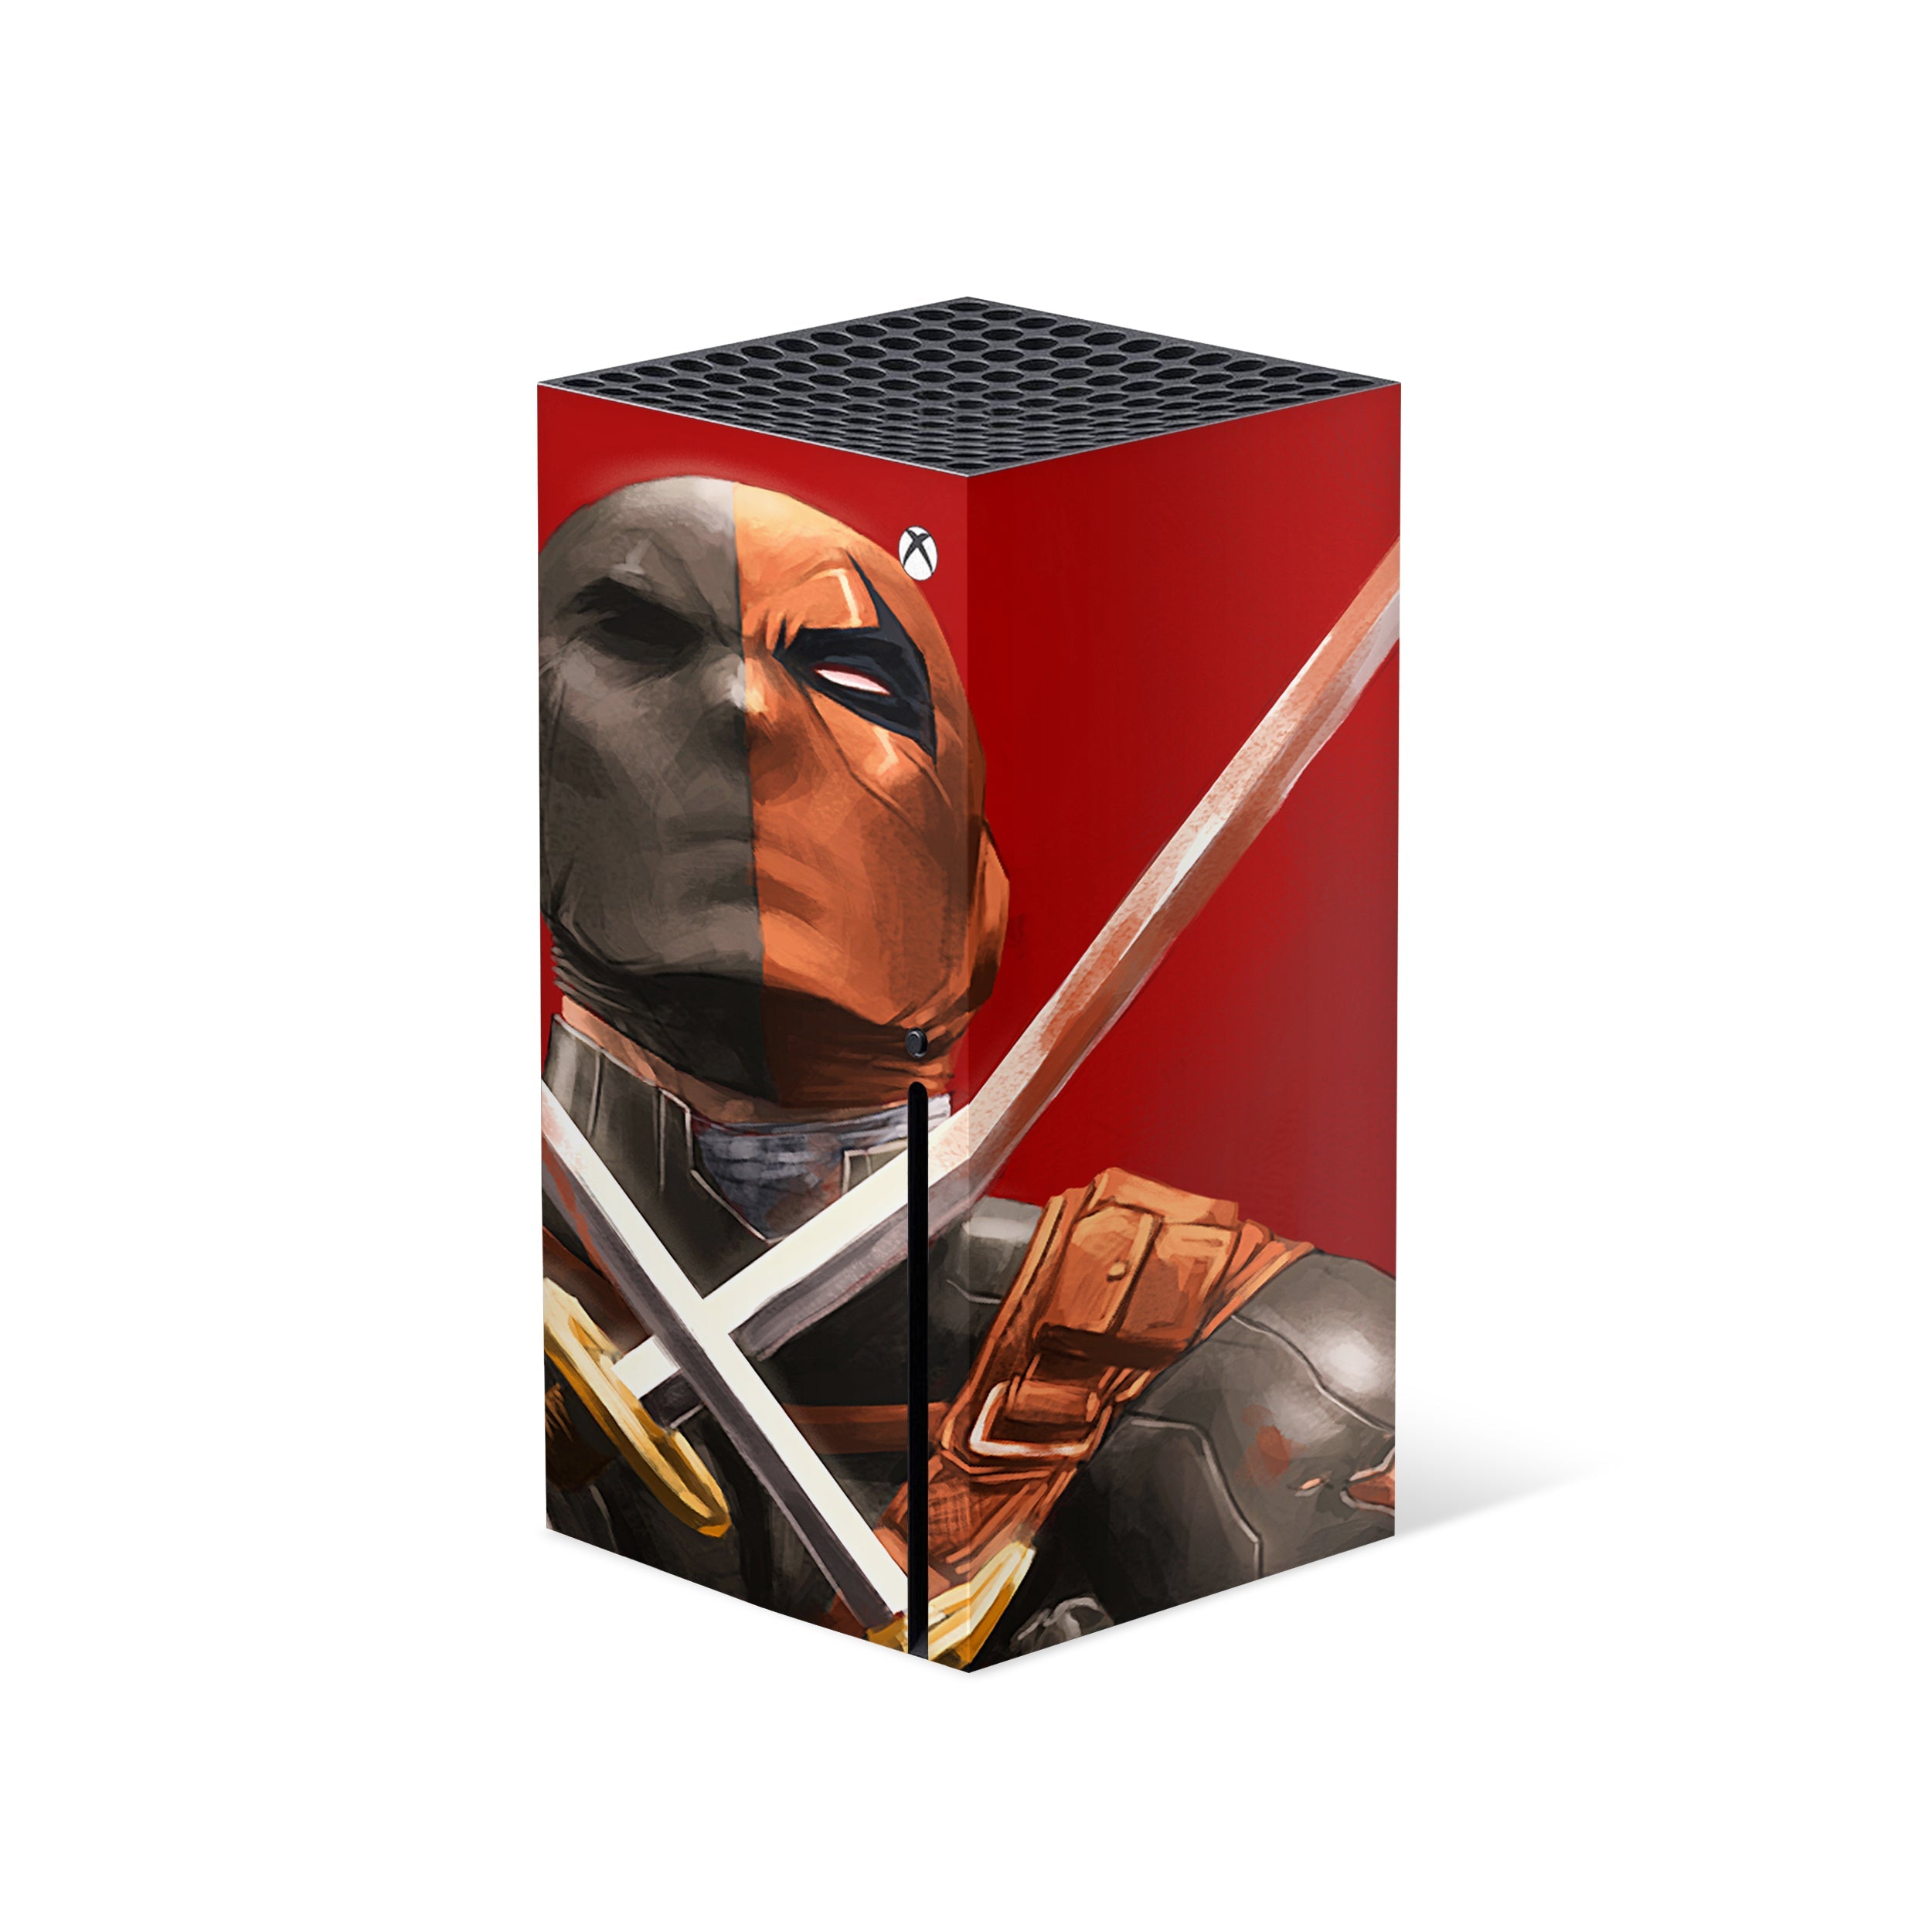 A video game skin featuring a DC Comics Deathstroke design for the Xbox Series X.